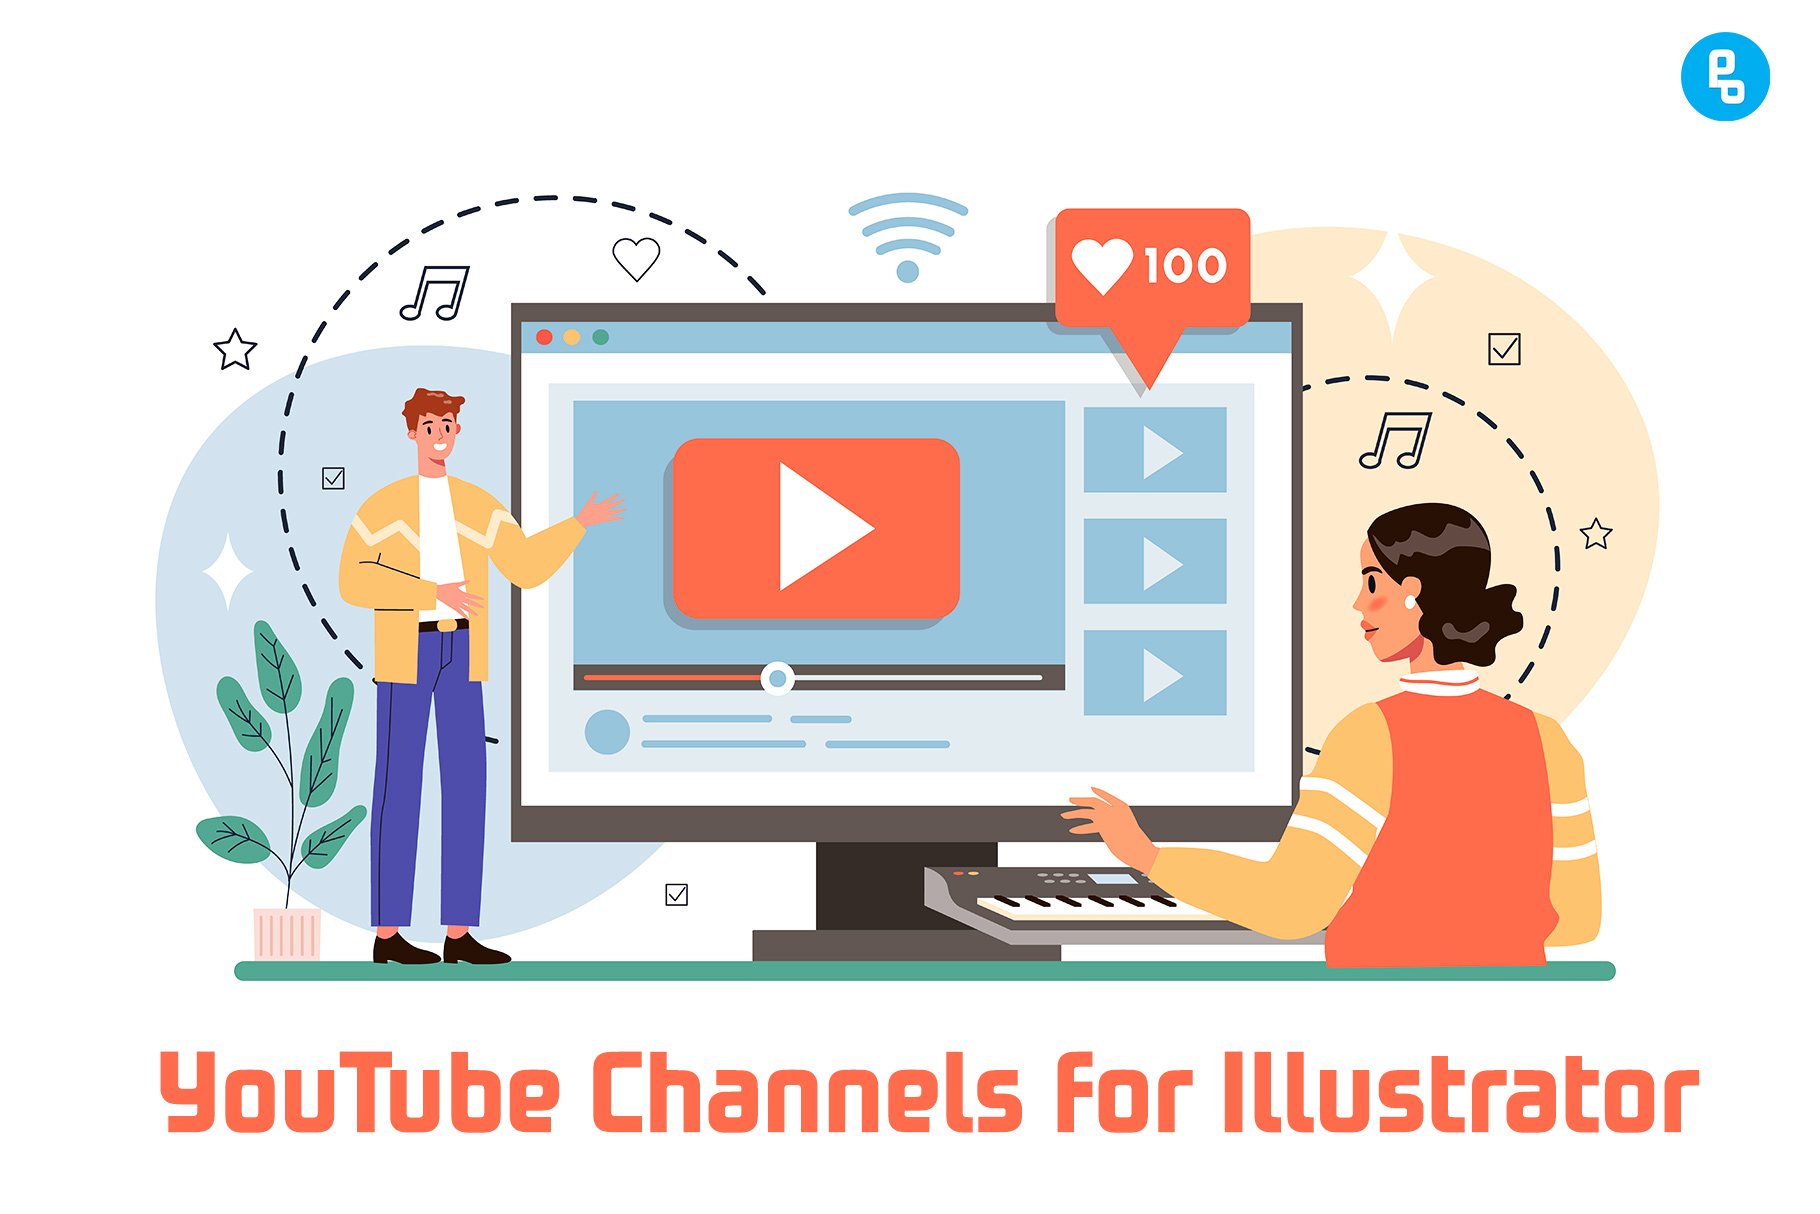 The software allows you to create 2D images or even make them 3D. This article will help you in finding the best channels on YouTube for learning Adobe Illustrator.